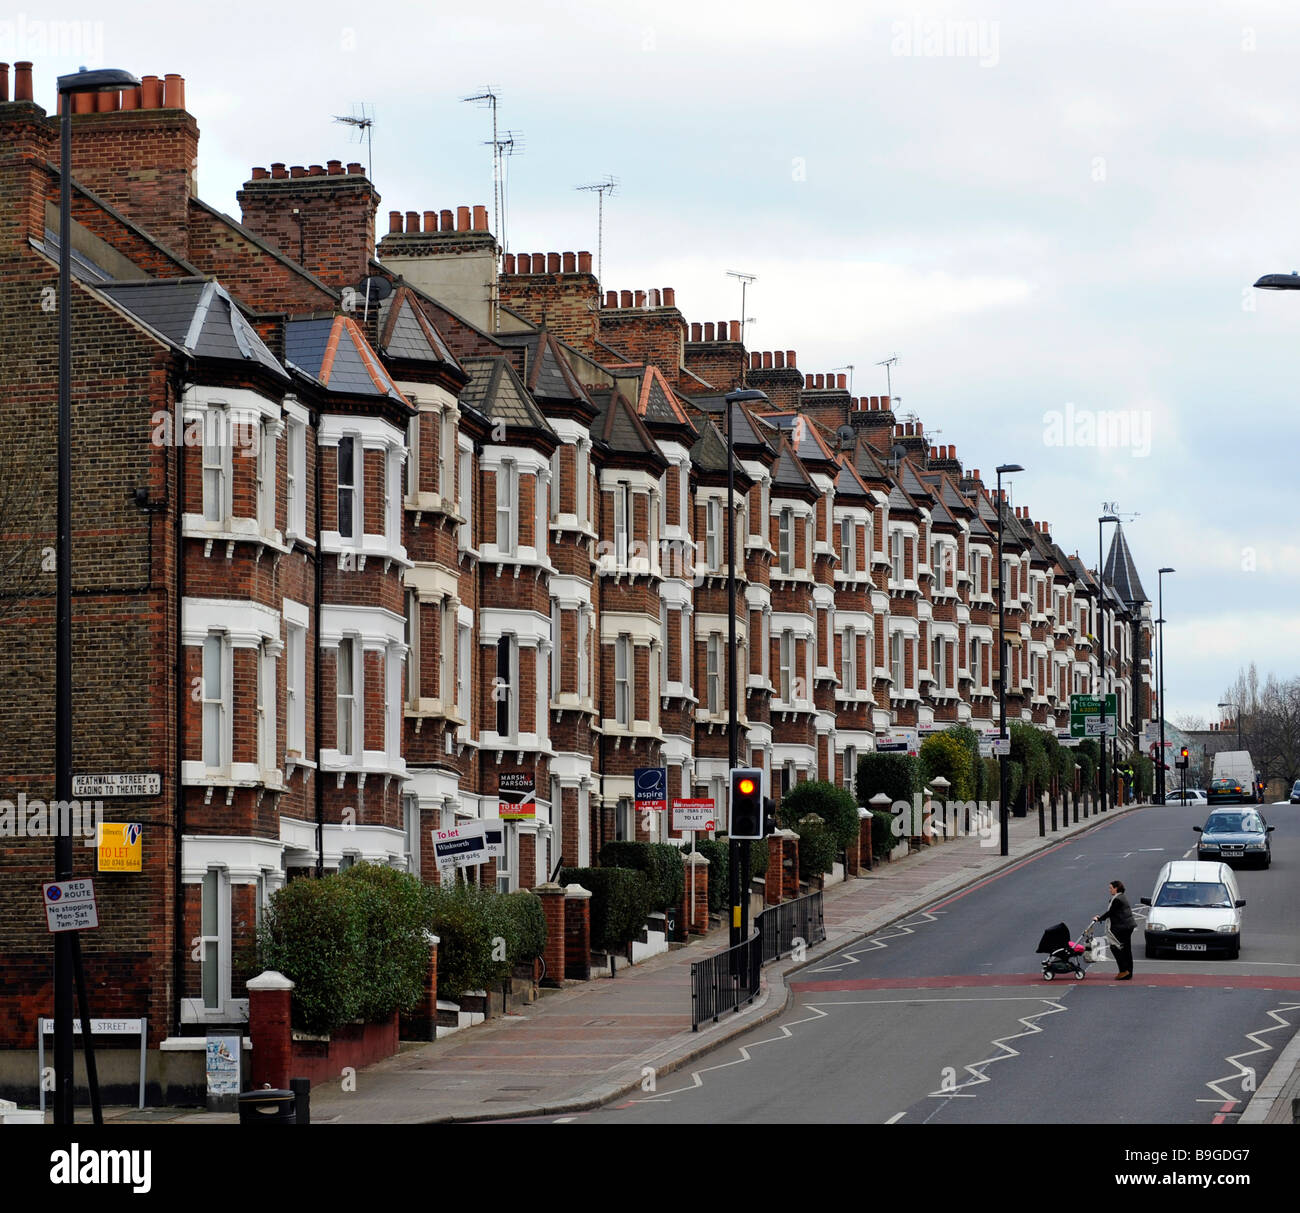 A row of maisonettes, flats, housing, in London, England, during the credit crunch, housing slump, economic crisis Stock Photo